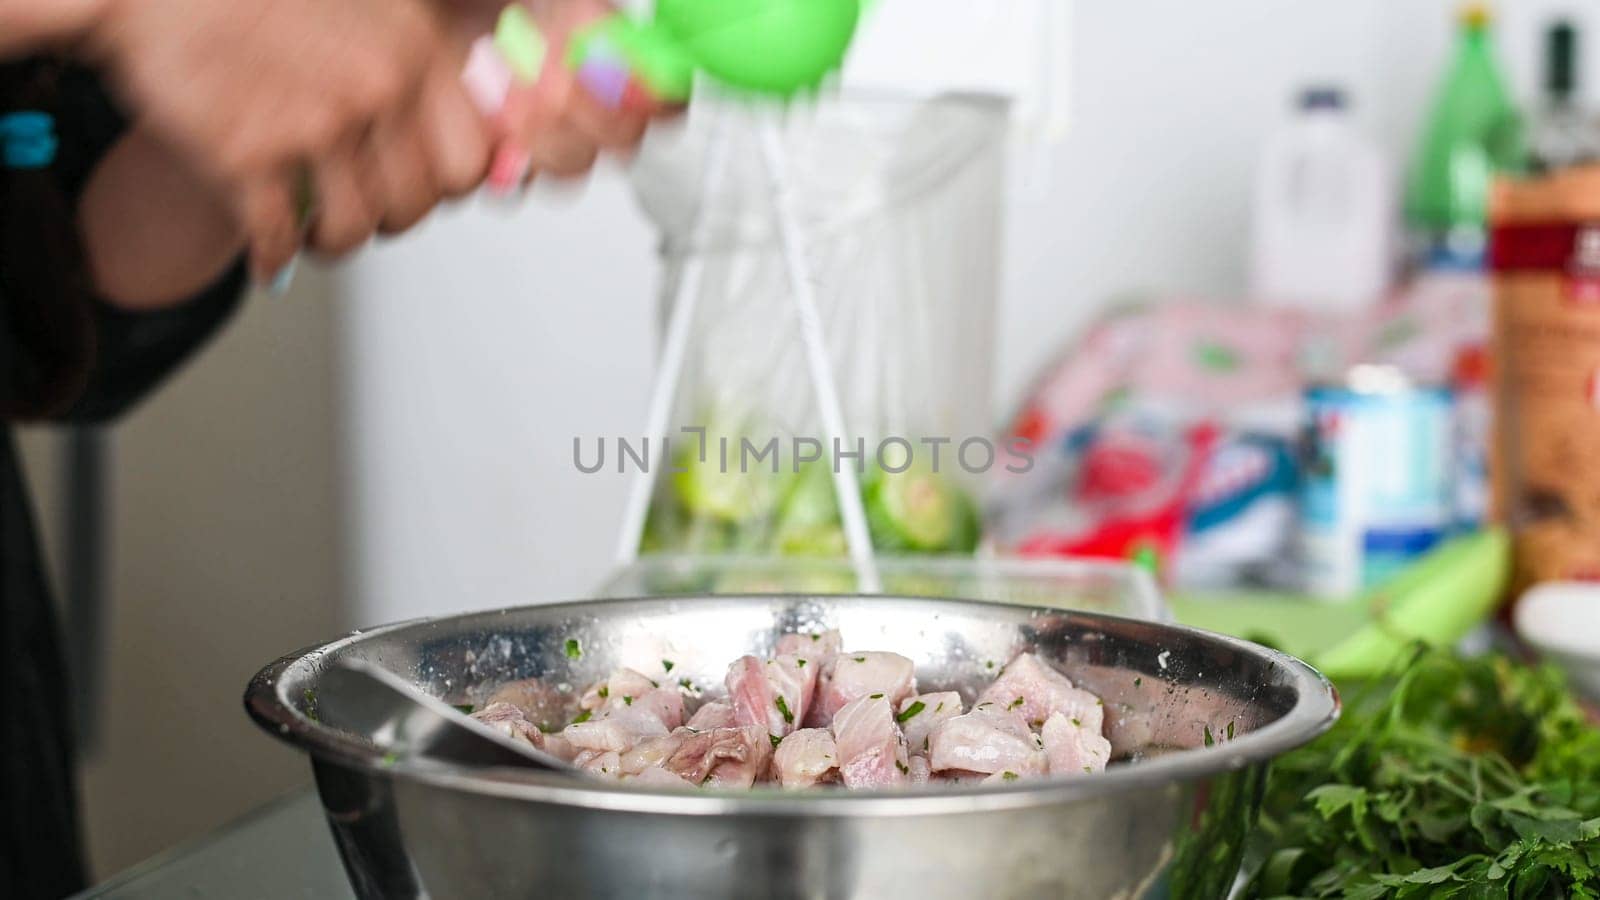 Peruvian food ceviche. 4 Preparation of ceviche, squeezing lemon juice over the ceviche. by Peruphotoart